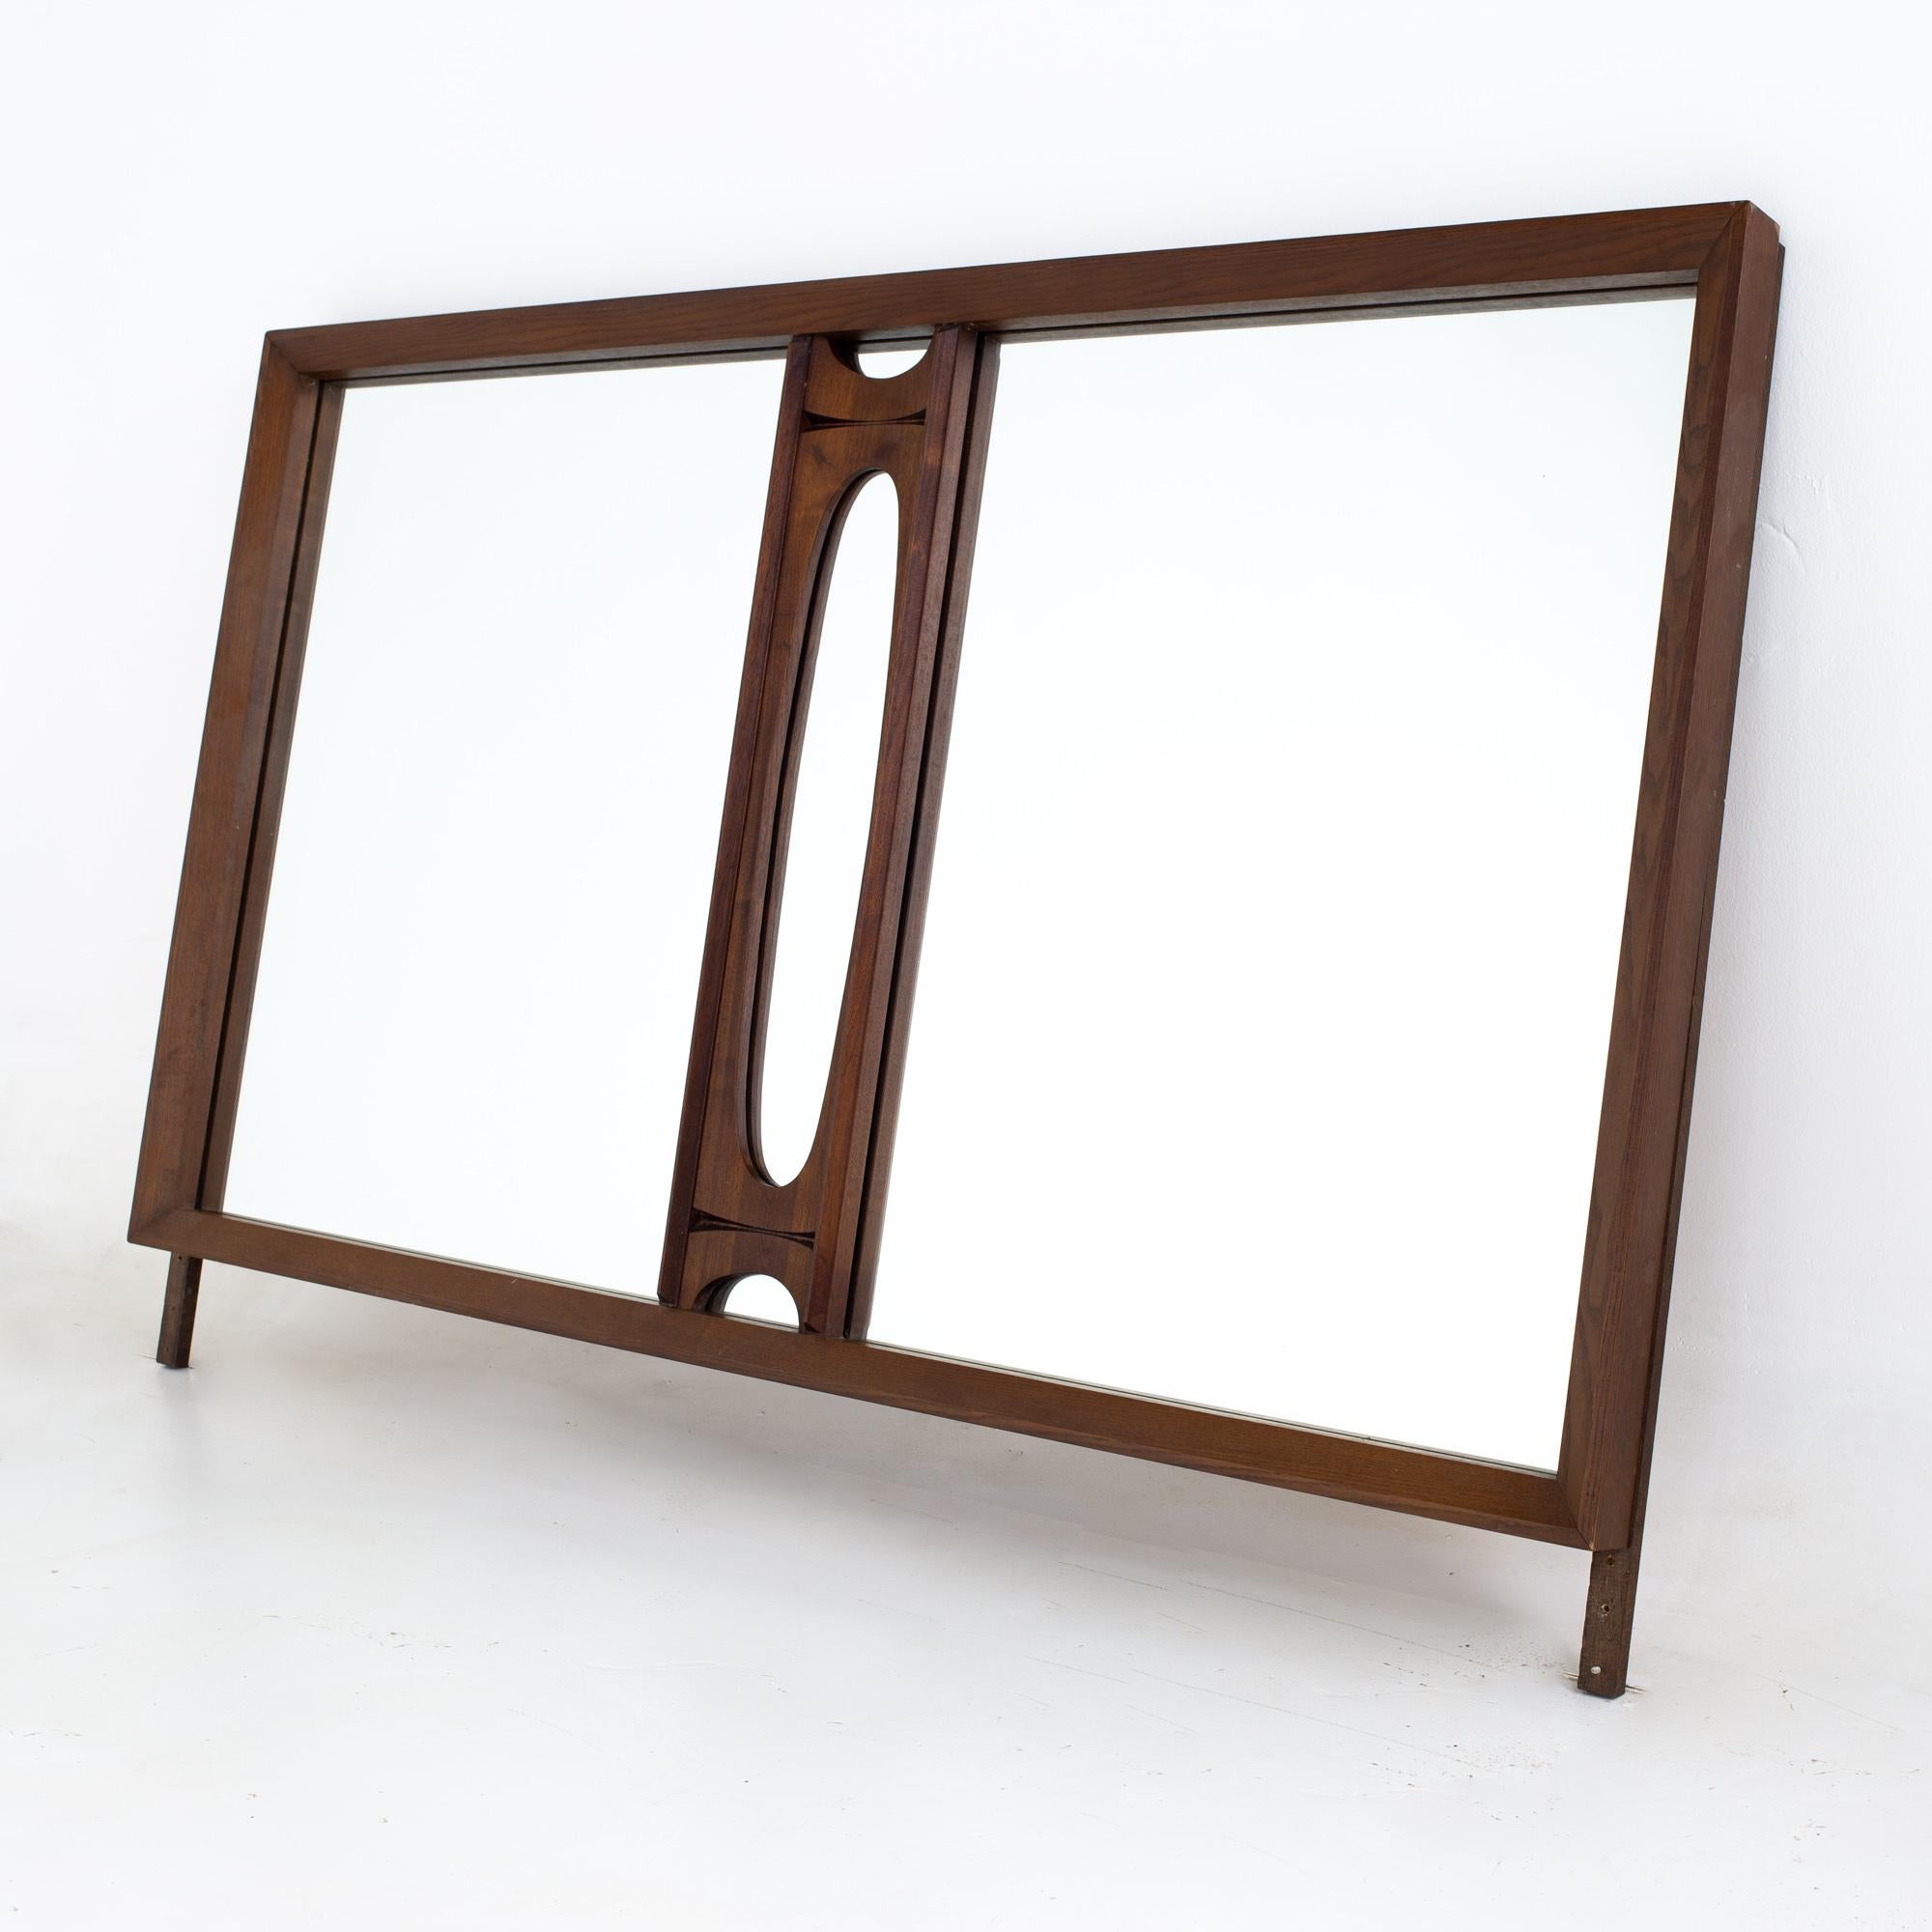 Tobago Canadian Brutalist Mid Century Walnut Mirror

Mirror measures: 63 wide x 3.5 deep x 38 inches high 

All pieces of furniture can be had in what we call restored vintage condition. That means the piece is restored upon purchase so it’s free of